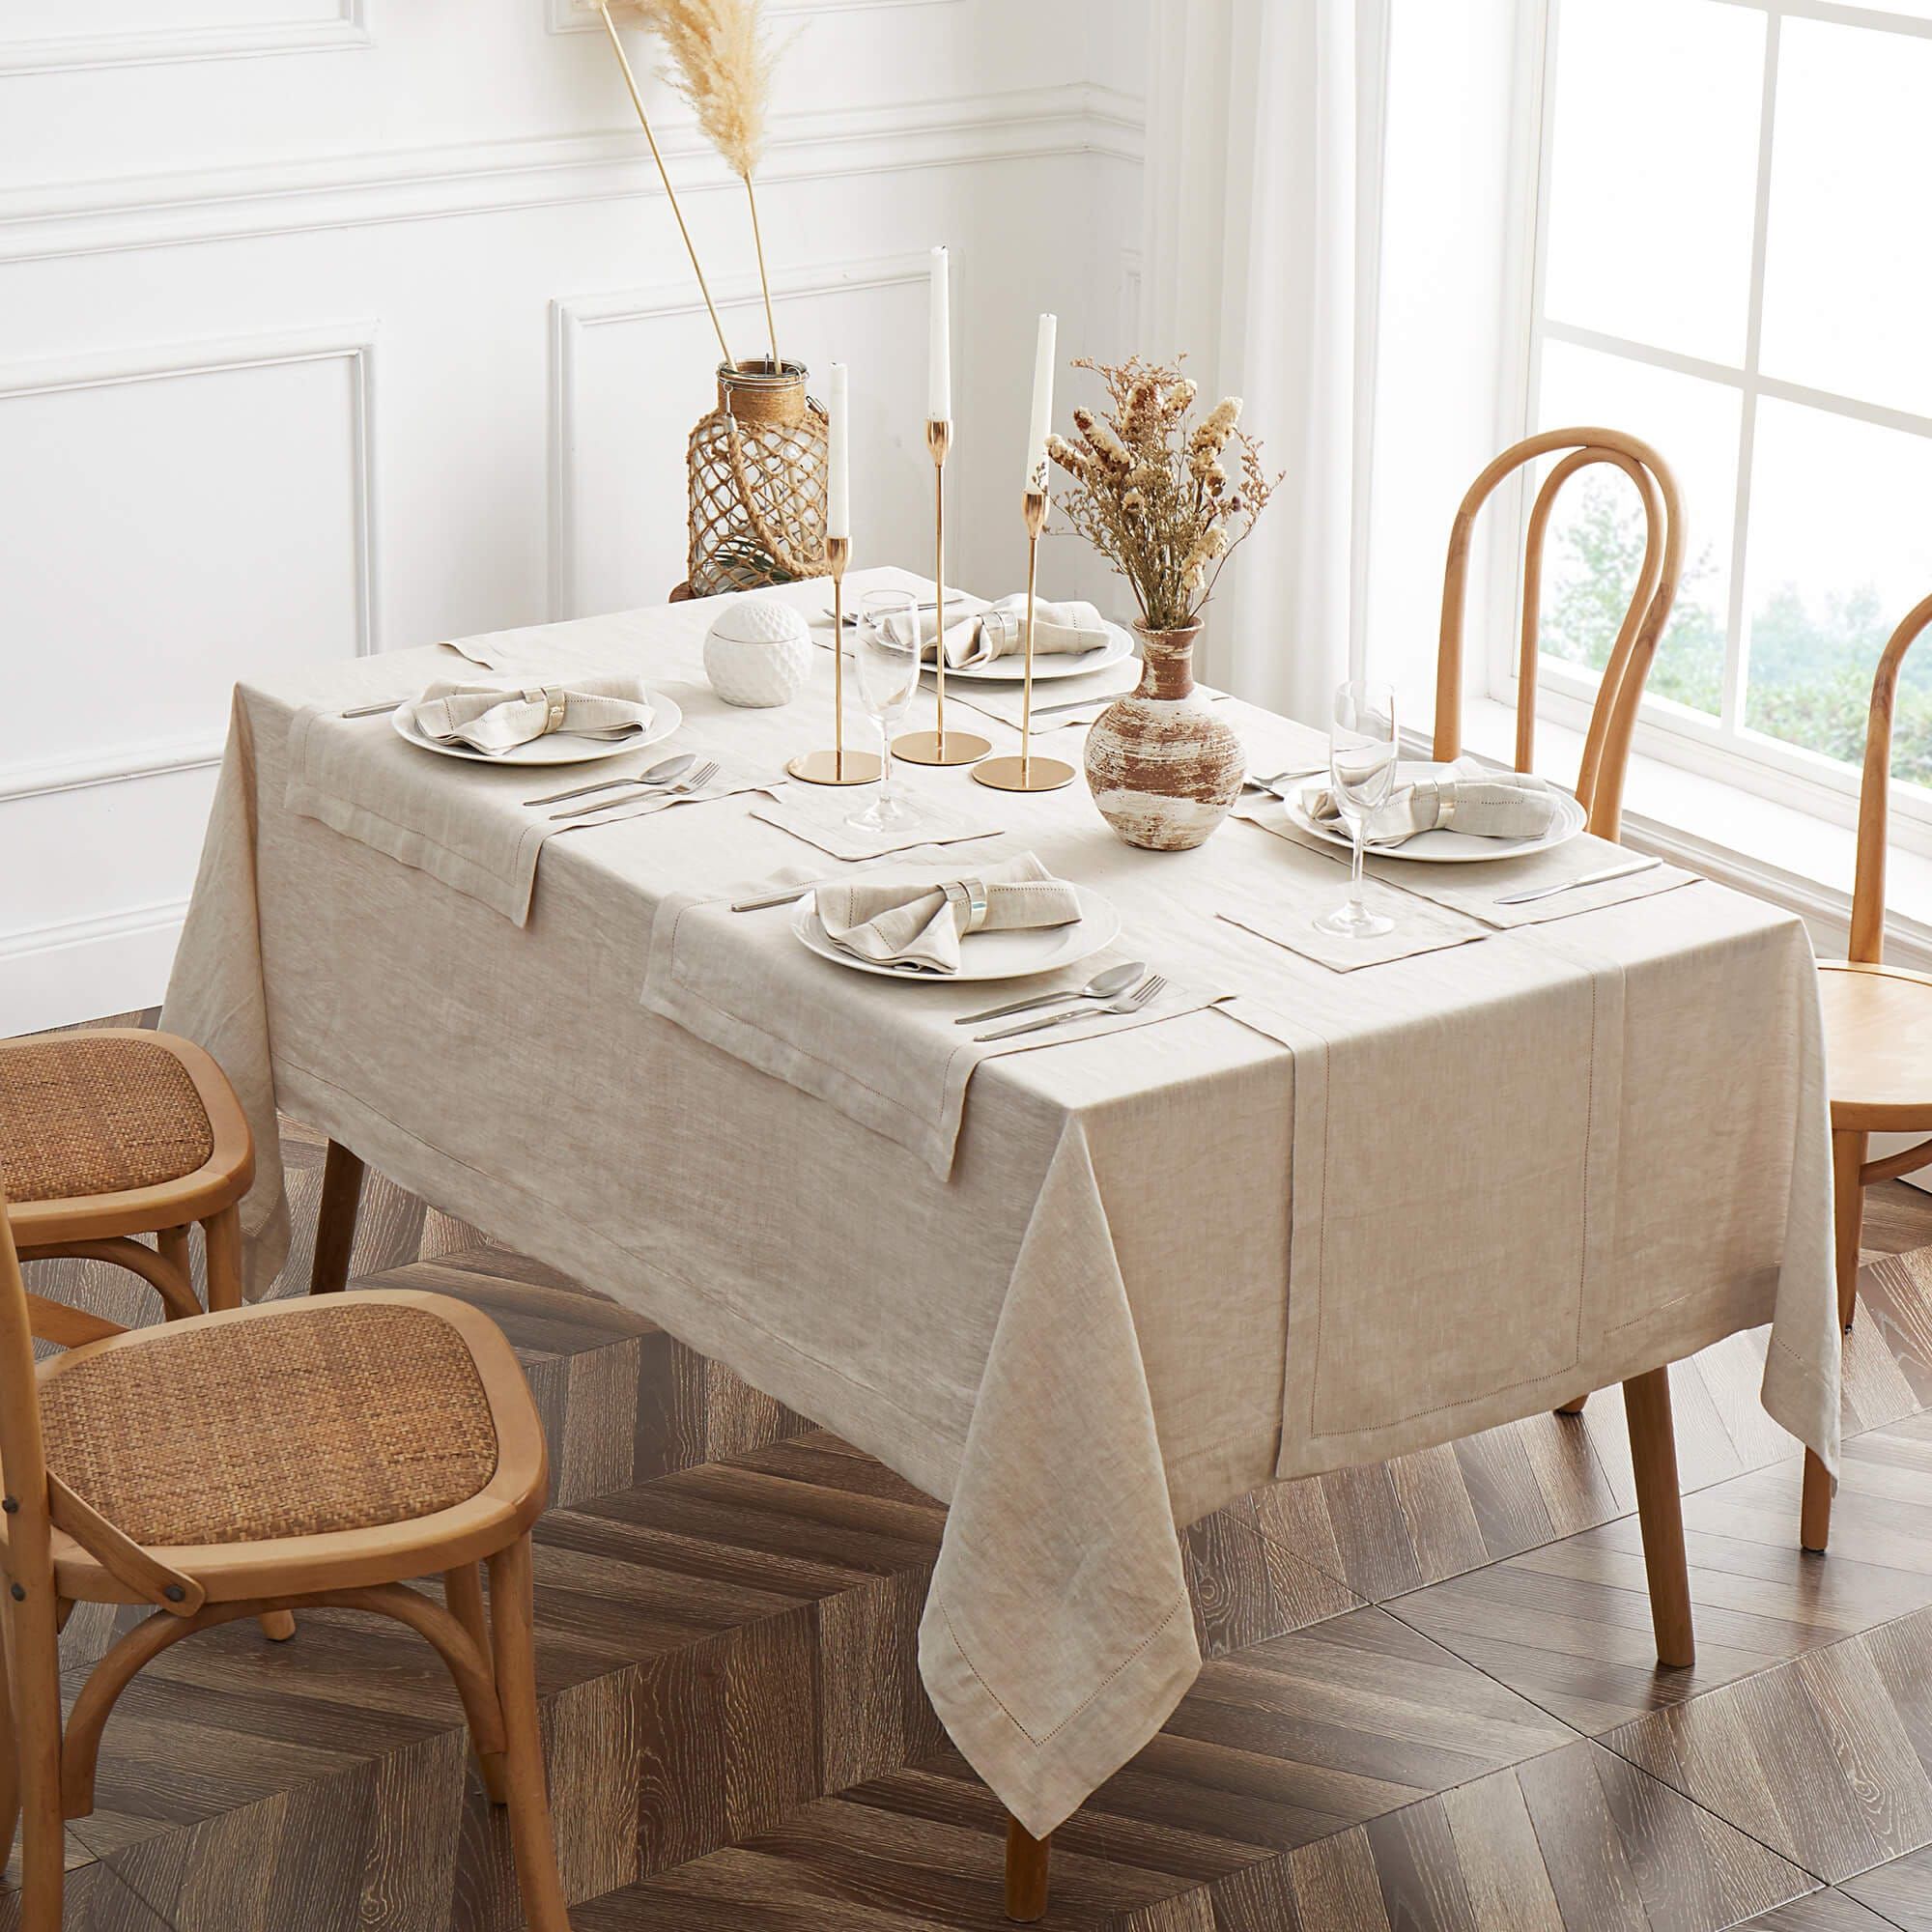 Cotton: The Perfect Choice for Dining Table Linens